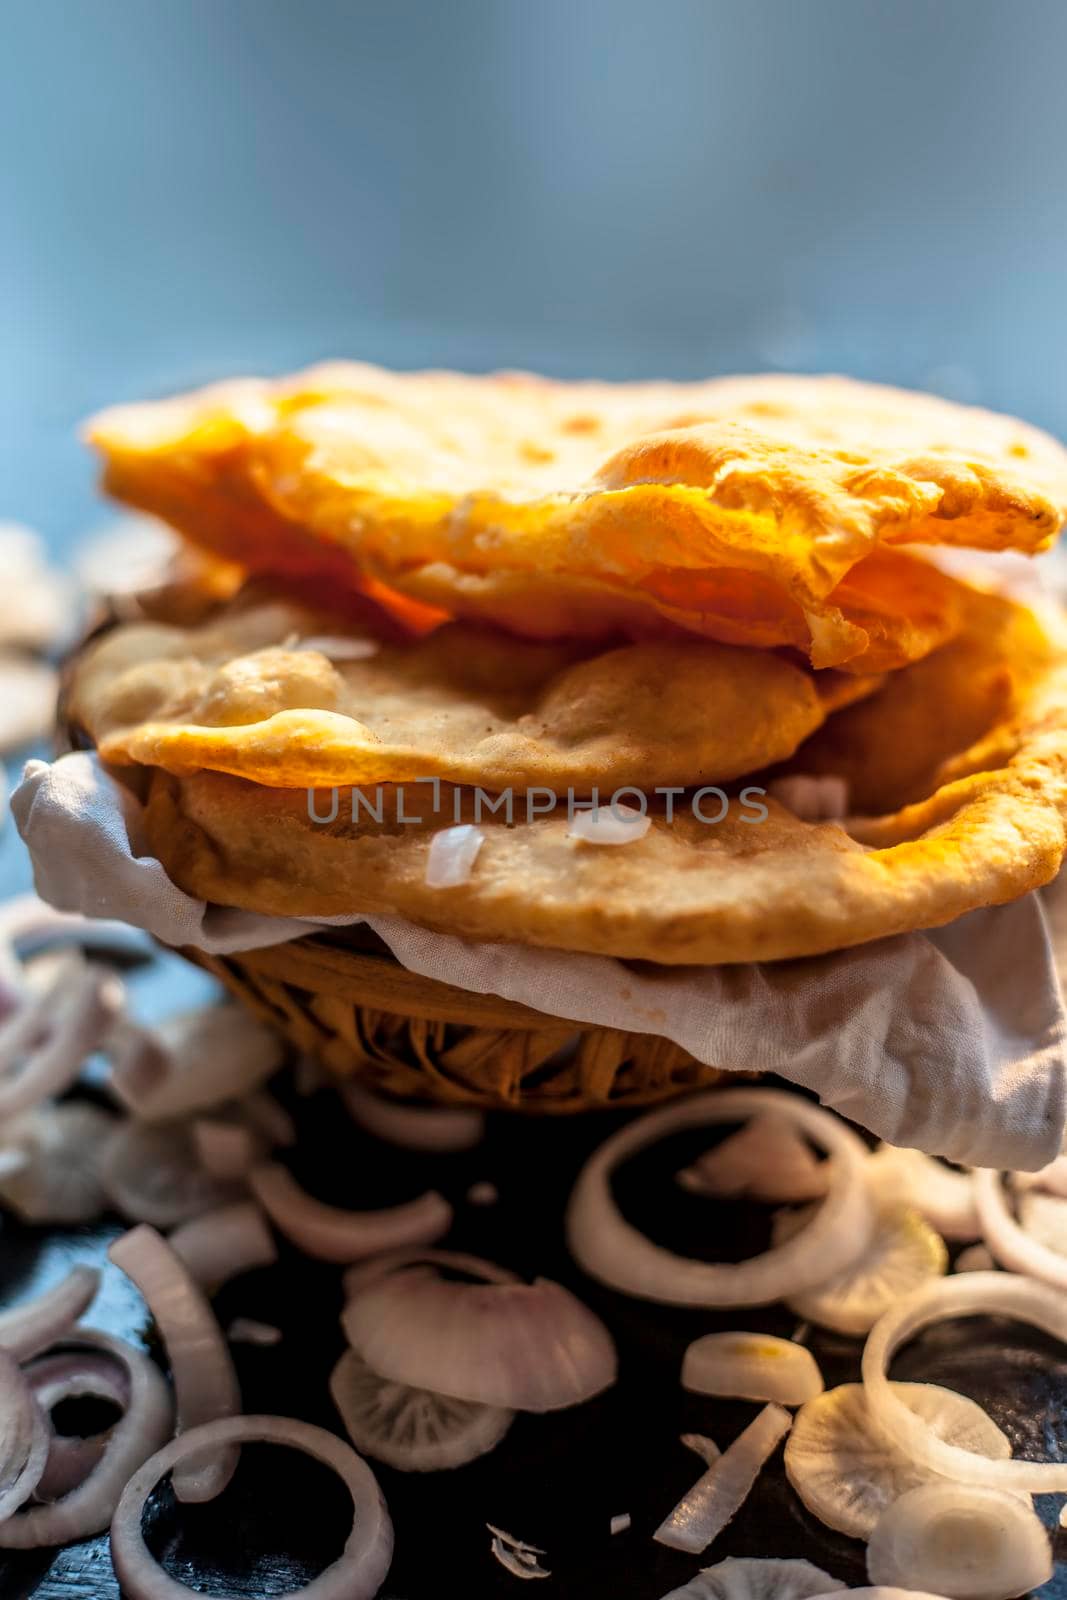 Close up shot of fresh fried bhatura or bhature or puri along with some cut onion rings on a black surface.